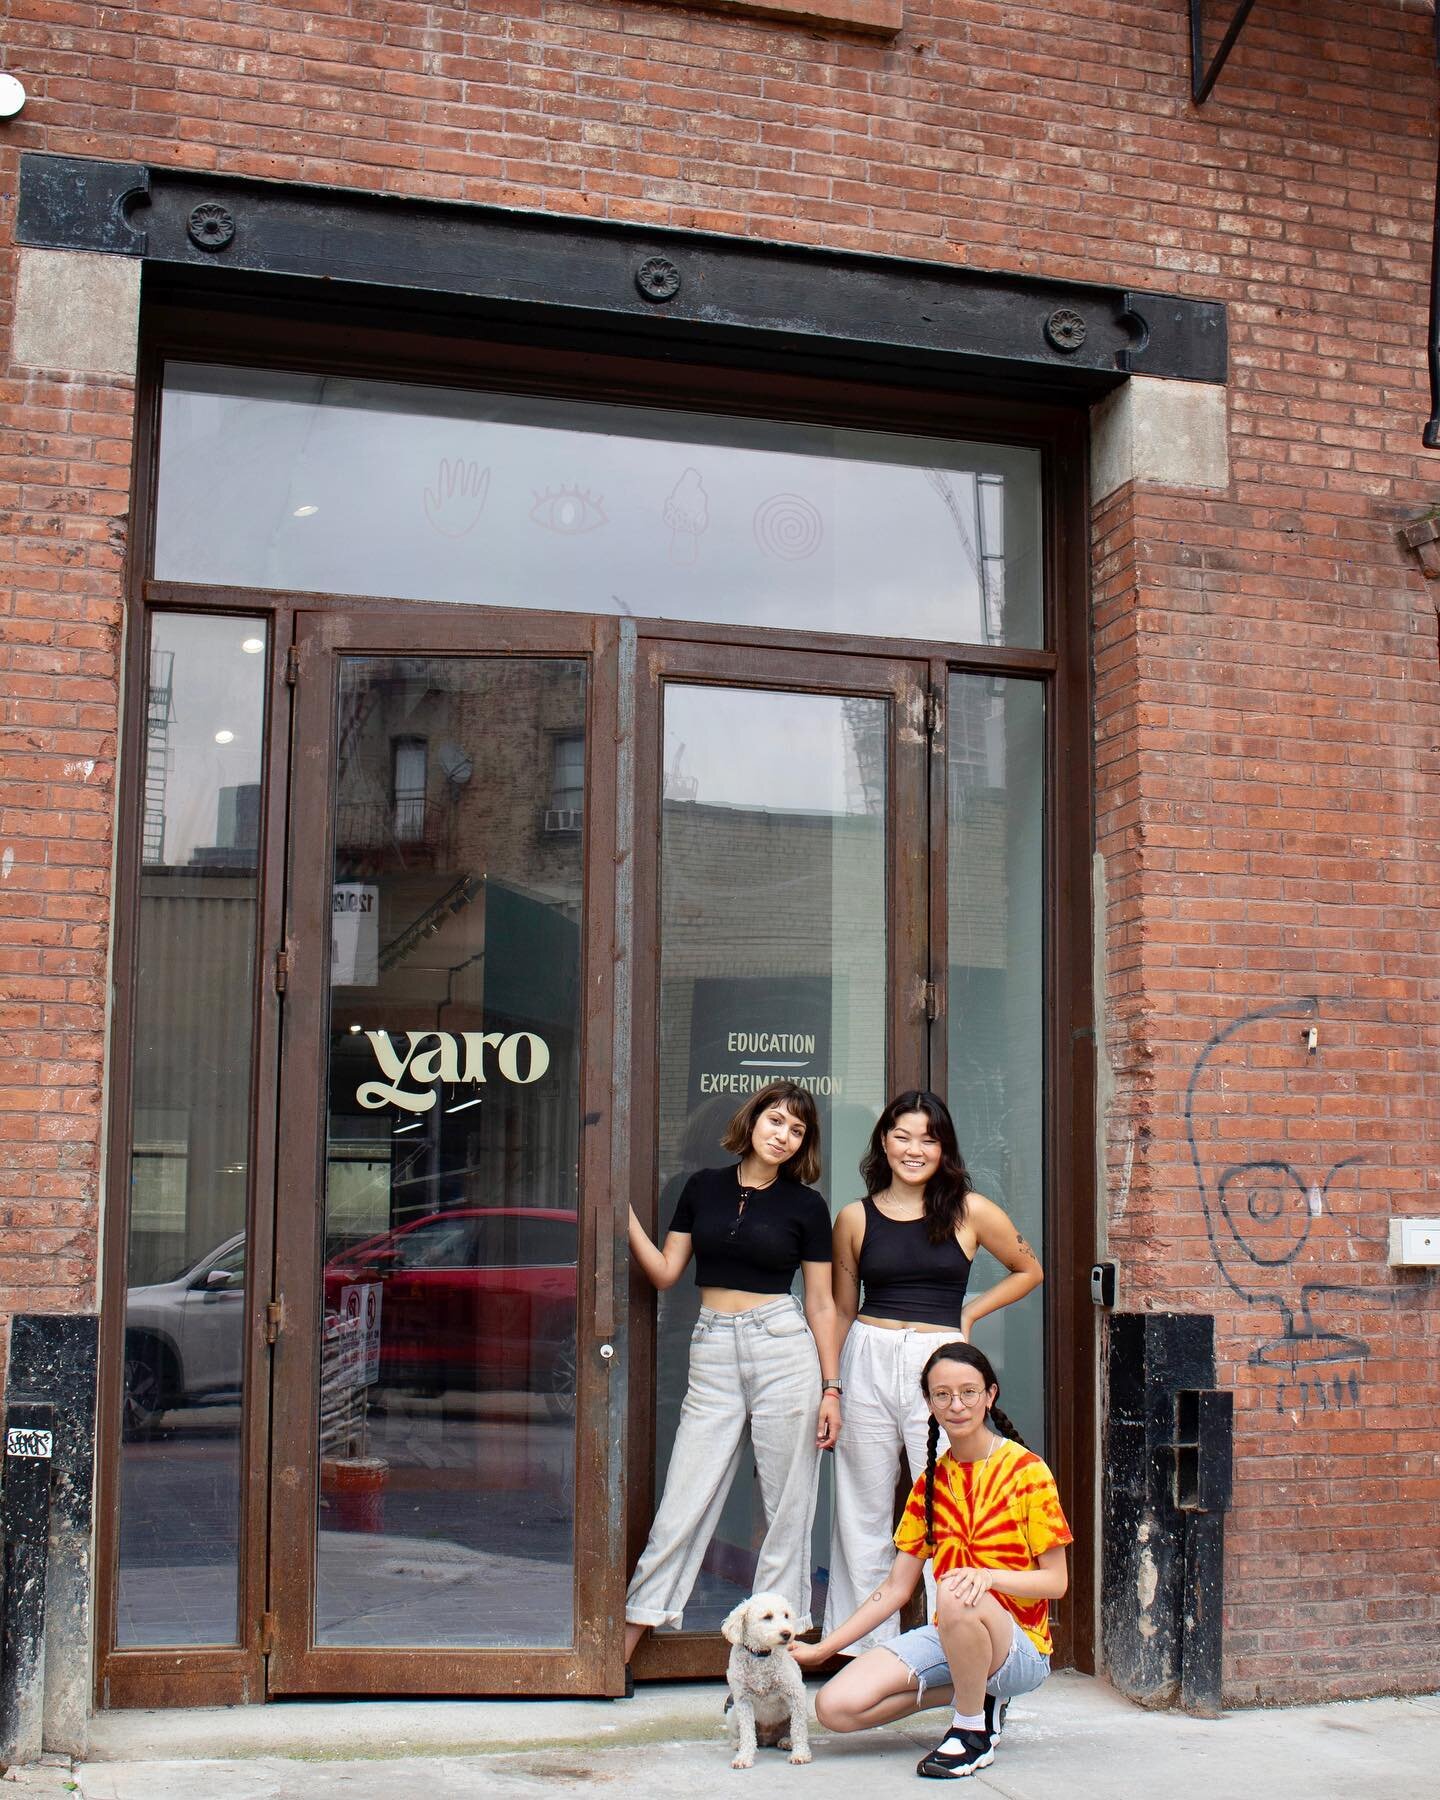 With the help of friends, family and the GP community @yarostudios is open 🙂⁣
⁣
So many feels. So excited. So tired. So feel like crying every five minutes but assuming that will pass. 😵&zwj;💫⁣
⁣
Thank you @greenpointers for the write up. We&rsquo